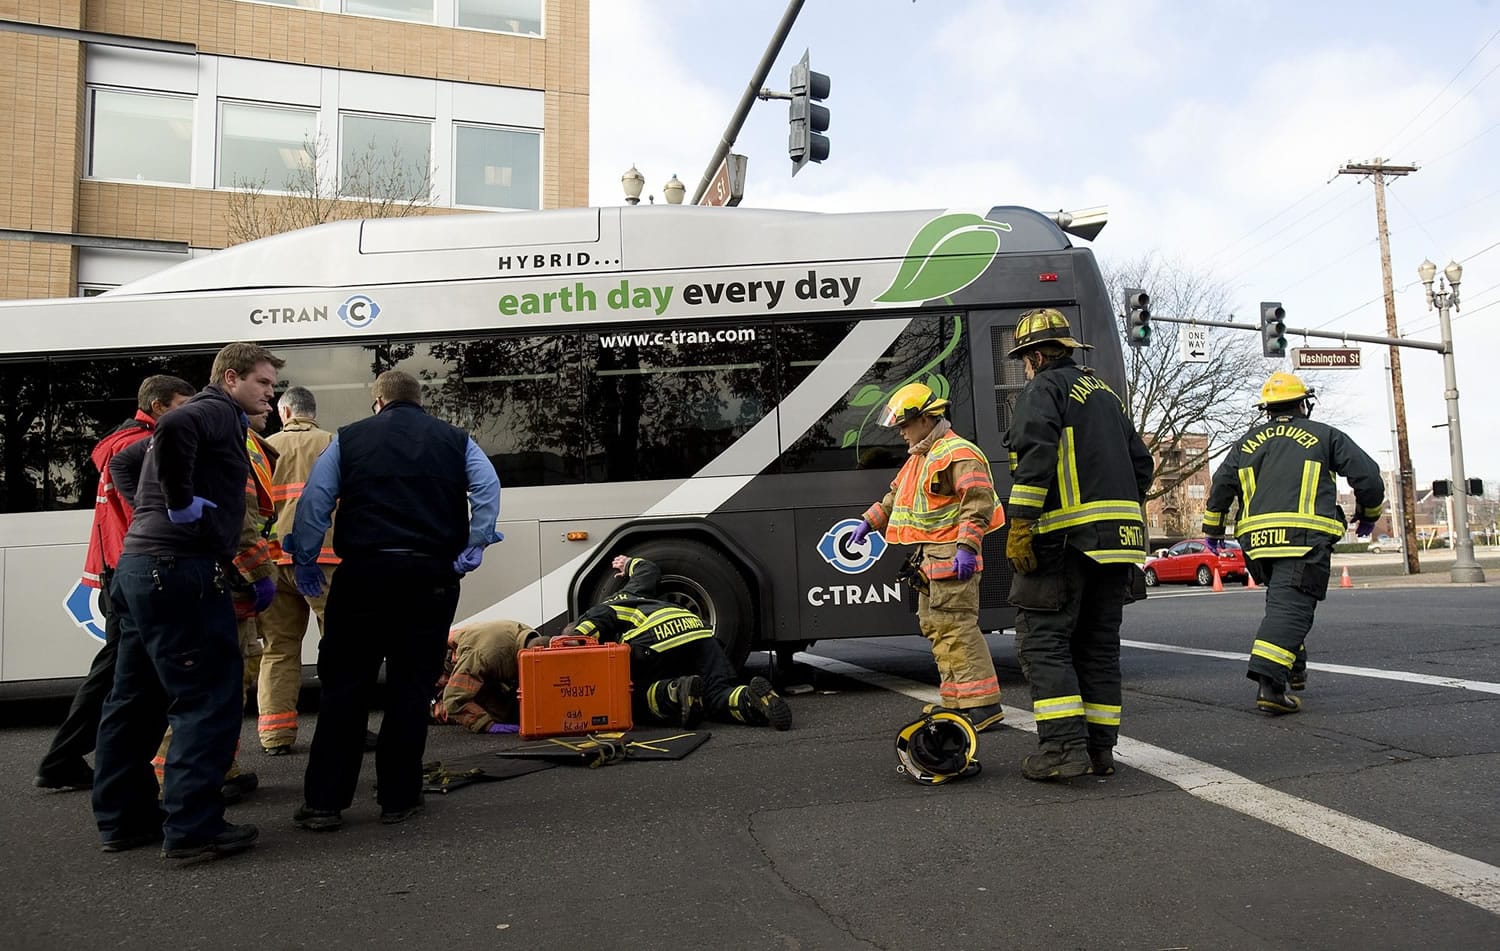 Police, firefighters and paramedics respond to a fatal accident involving a pedestrian and a C-Tran bus at the intersection of 8th Street and Washington Street in downtown Vancouver.